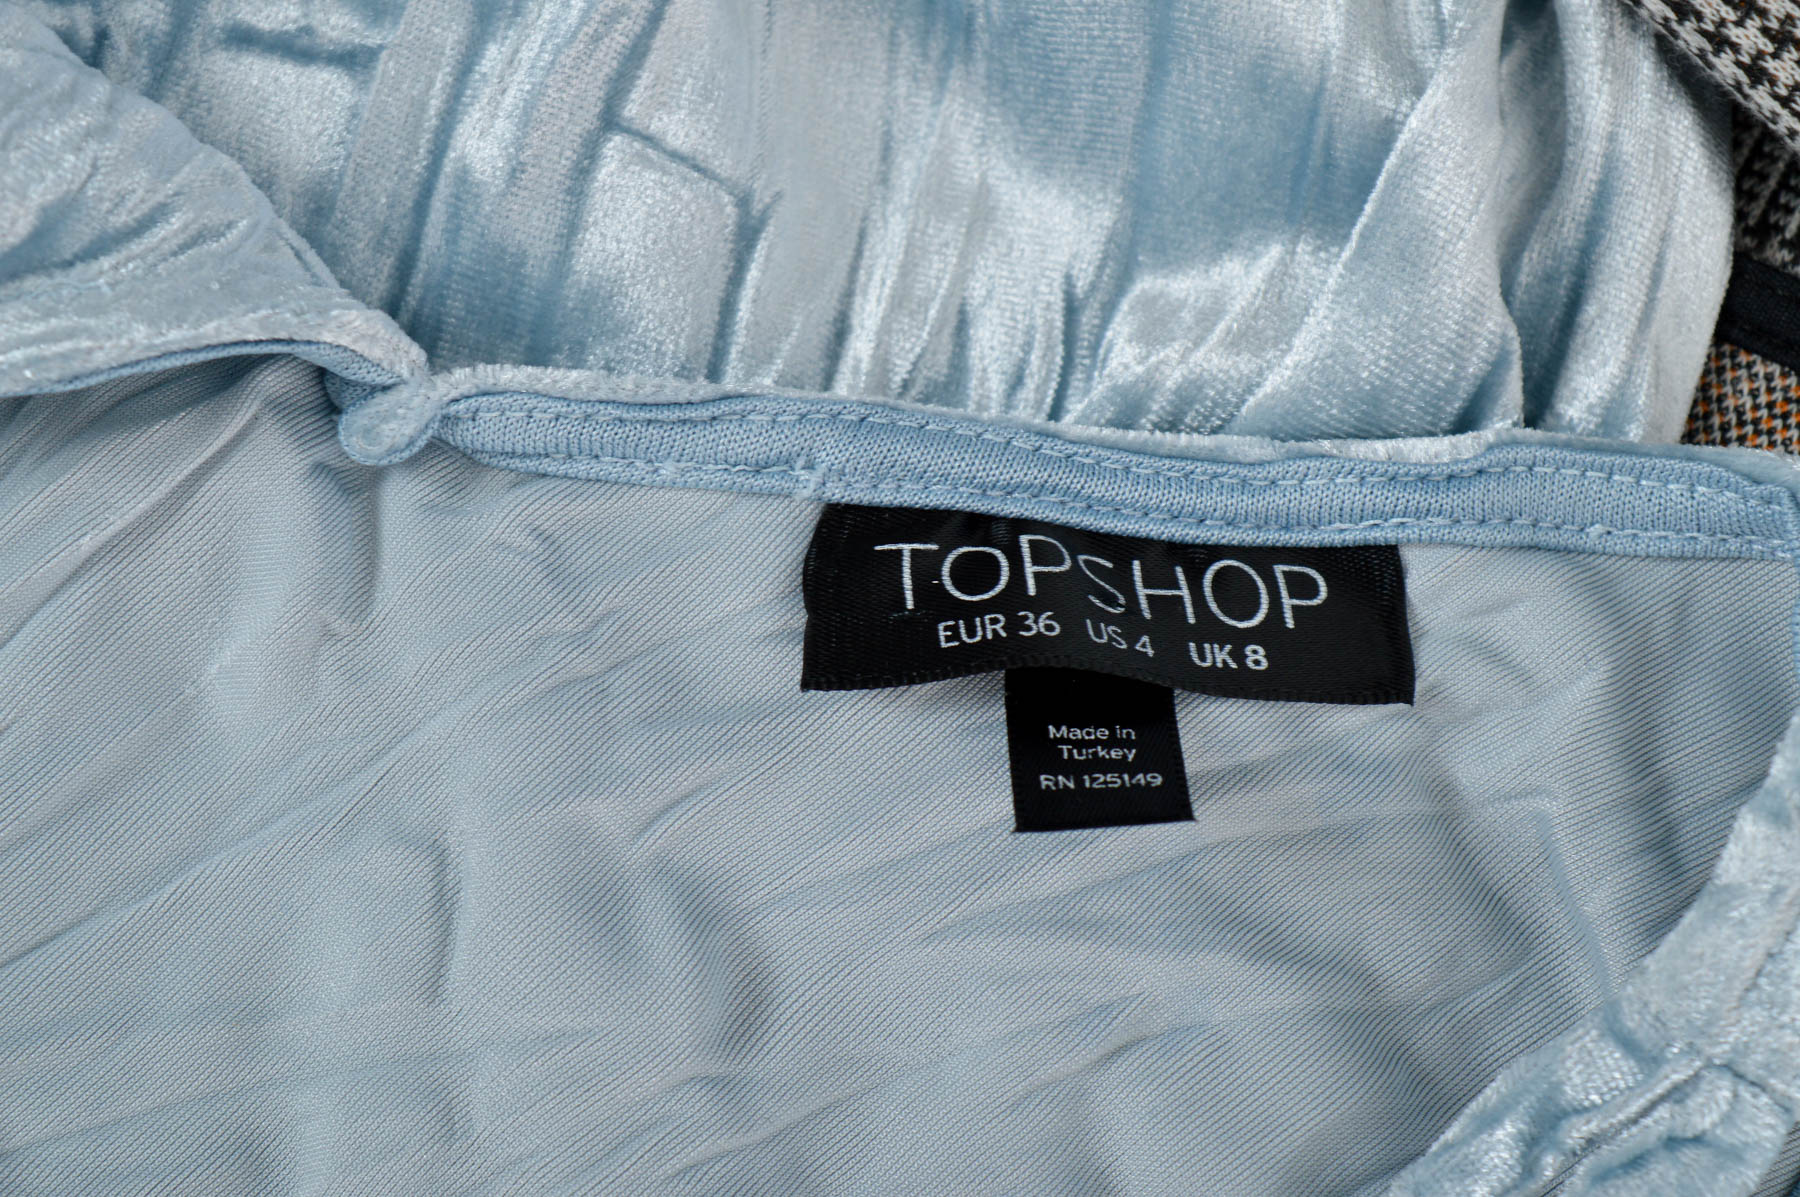 Dress with a wrinkled effect - TOPSHOP - 2